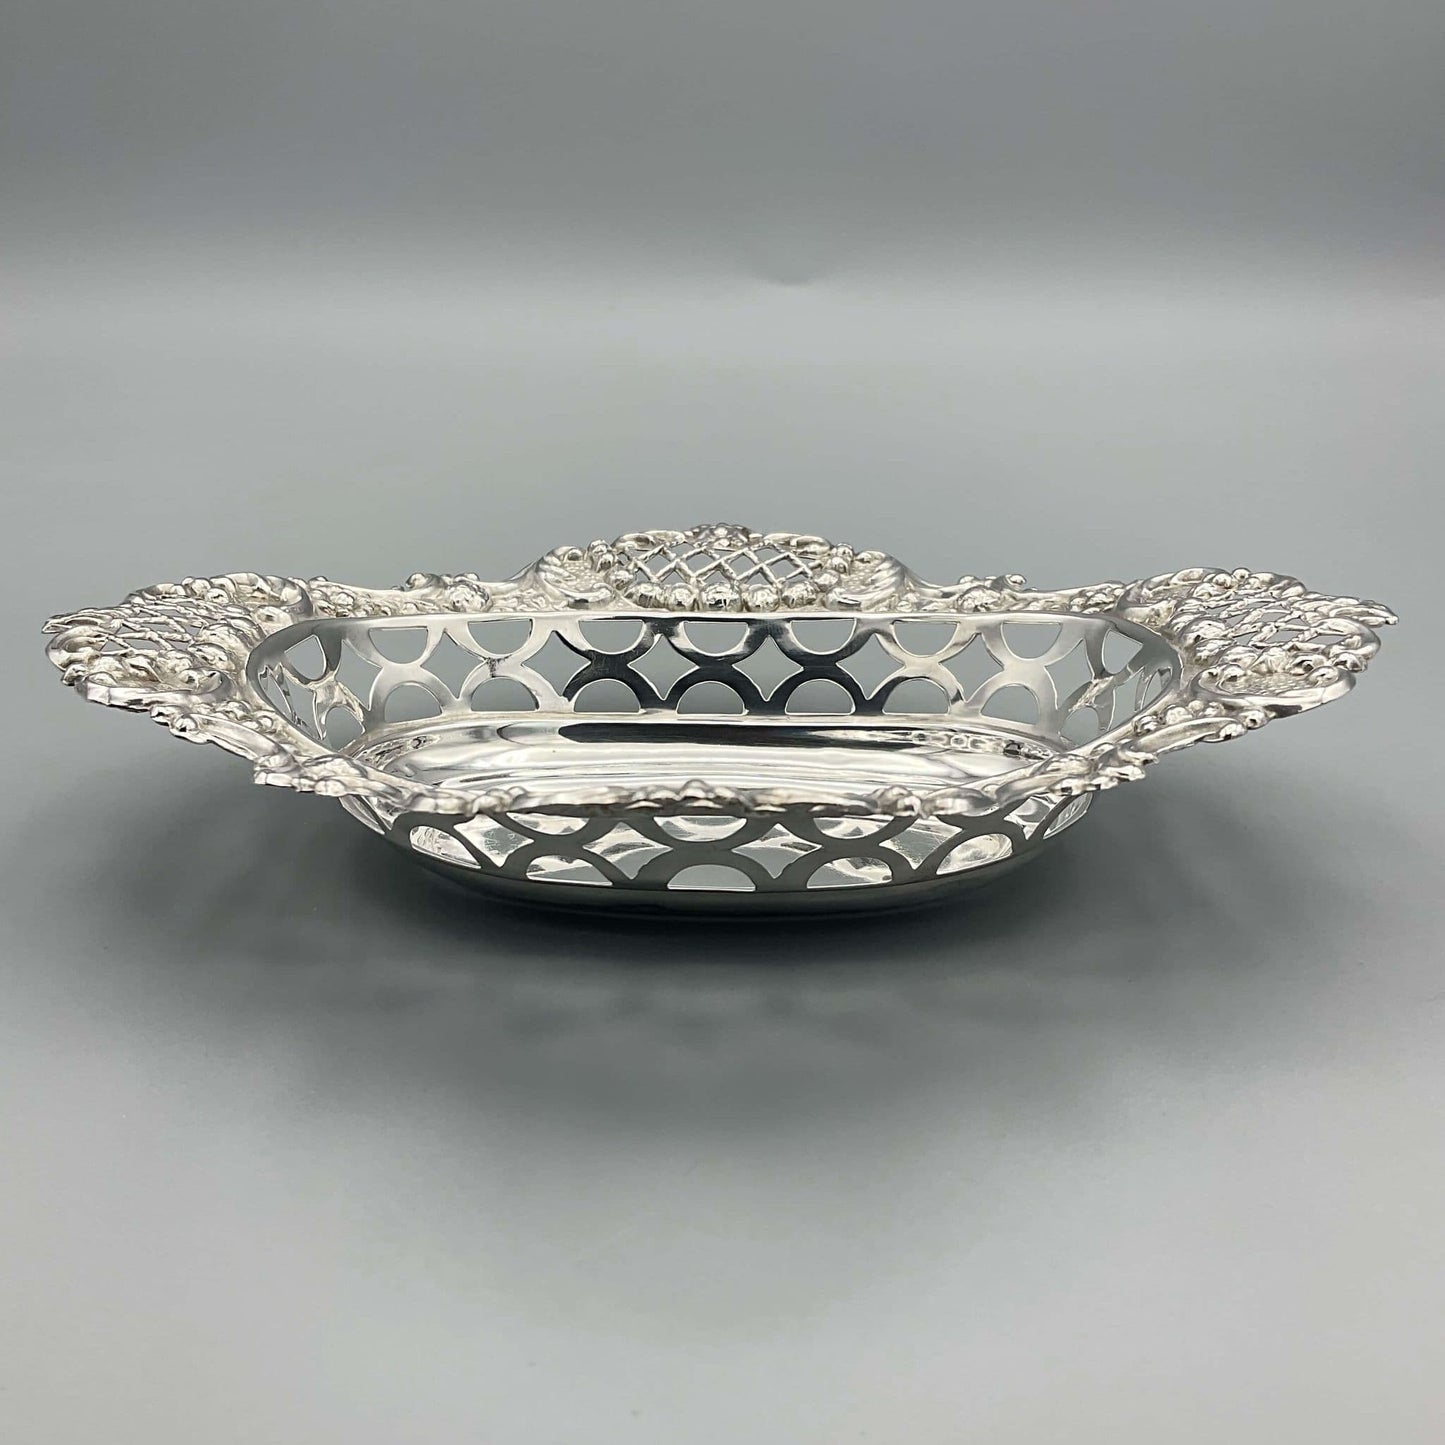 Side view showing pierced design of antique silver bowl